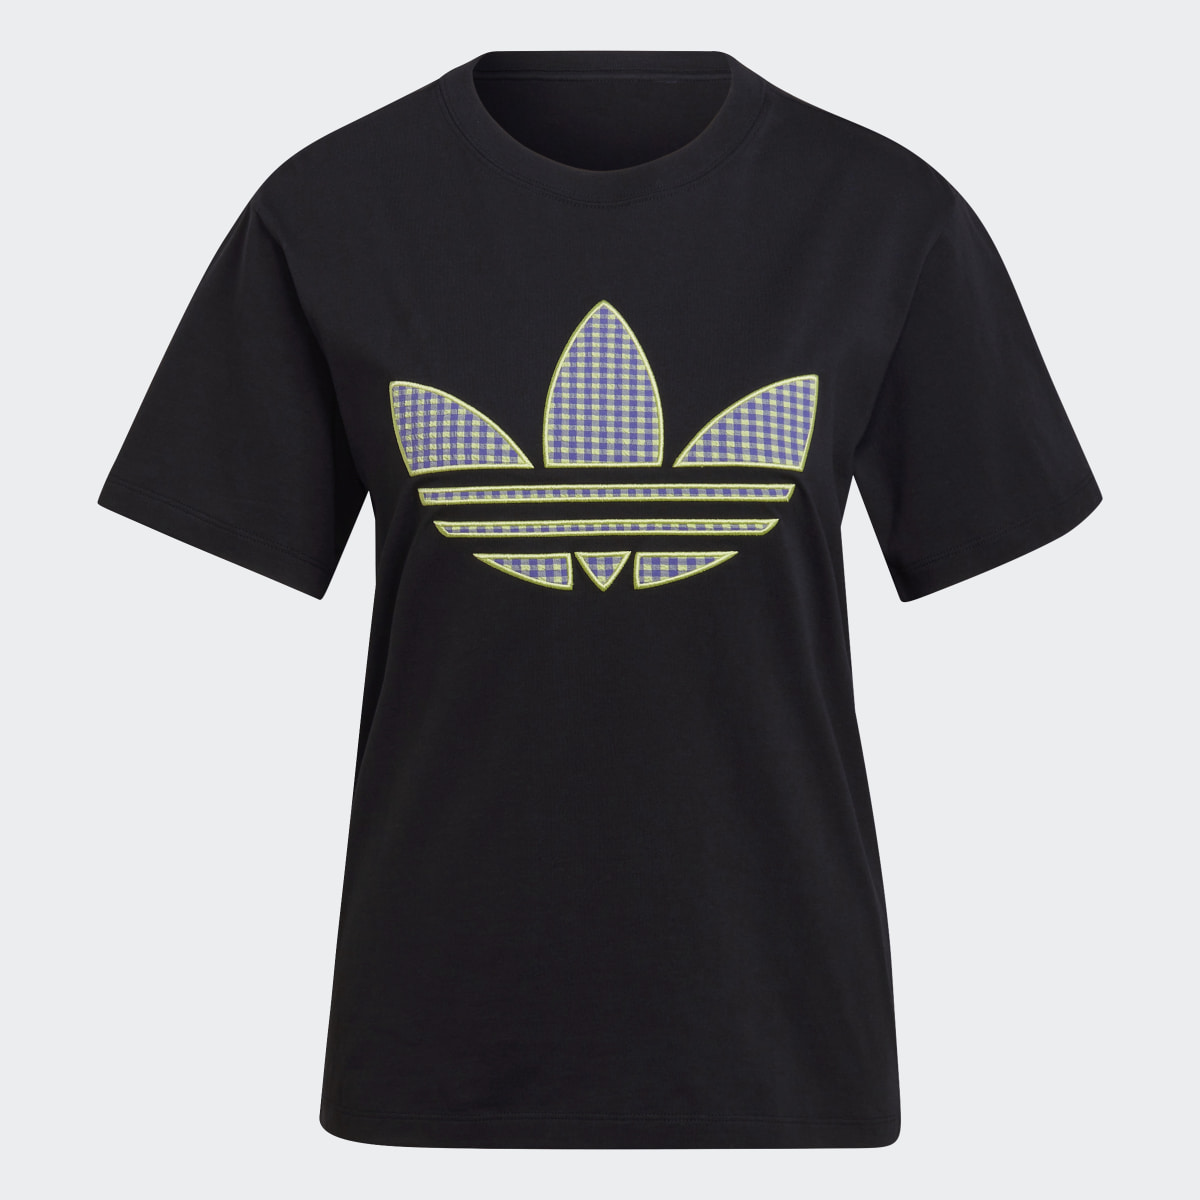 Adidas Tee with Trefoil Application. 6